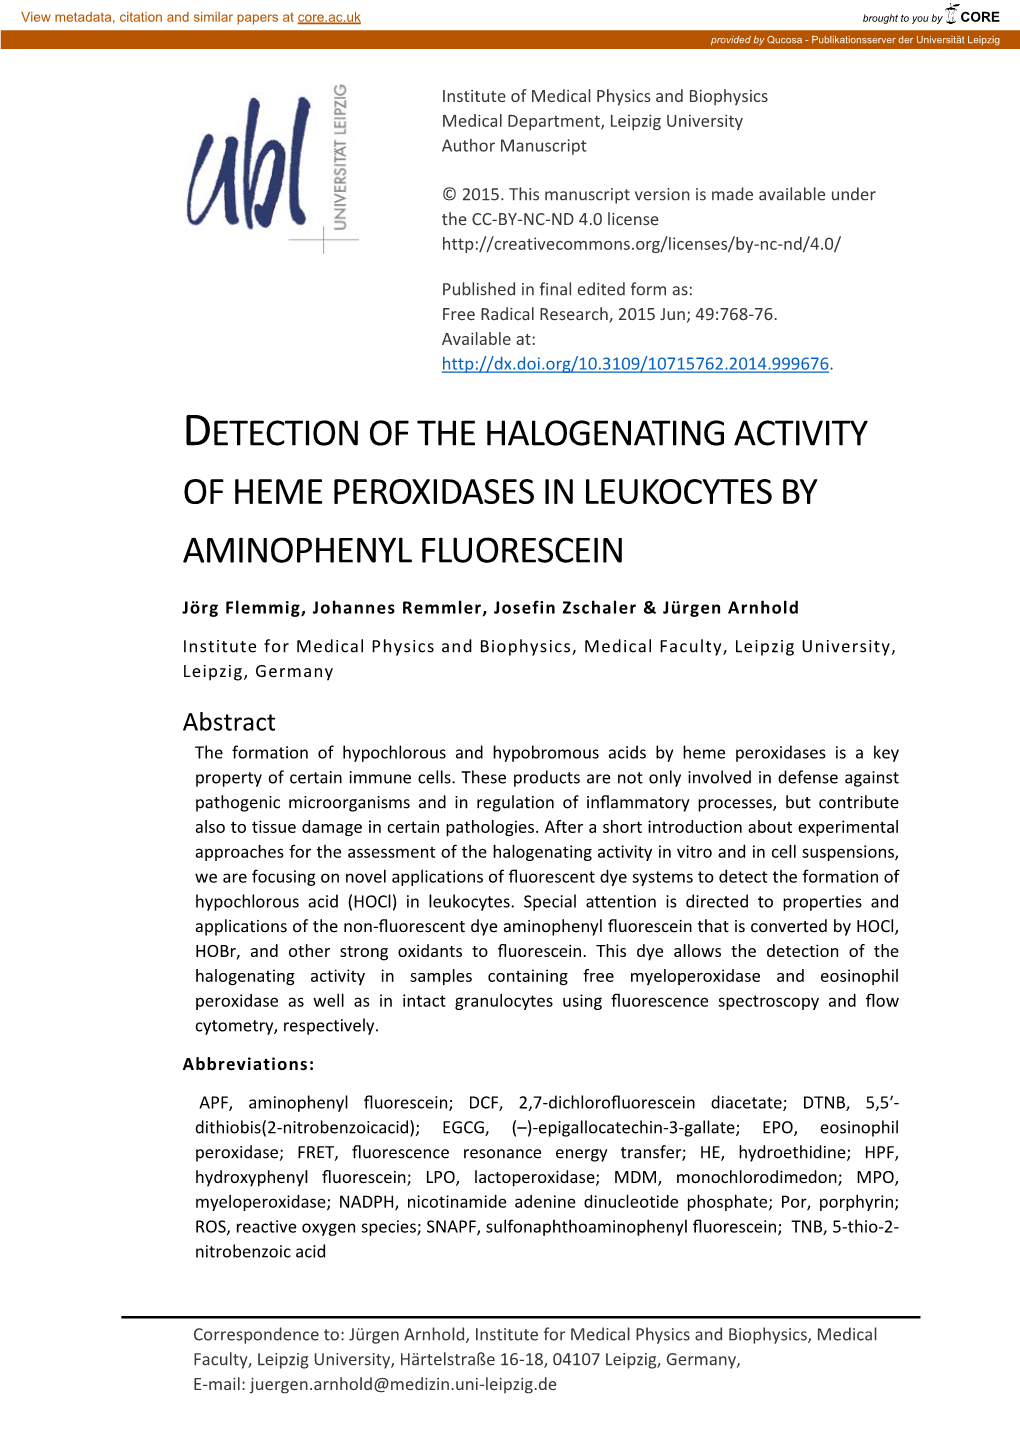 Detection of the Halogenating Activity of Heme Peroxidases in Leukocytes by Aminophenyl Fluorescein